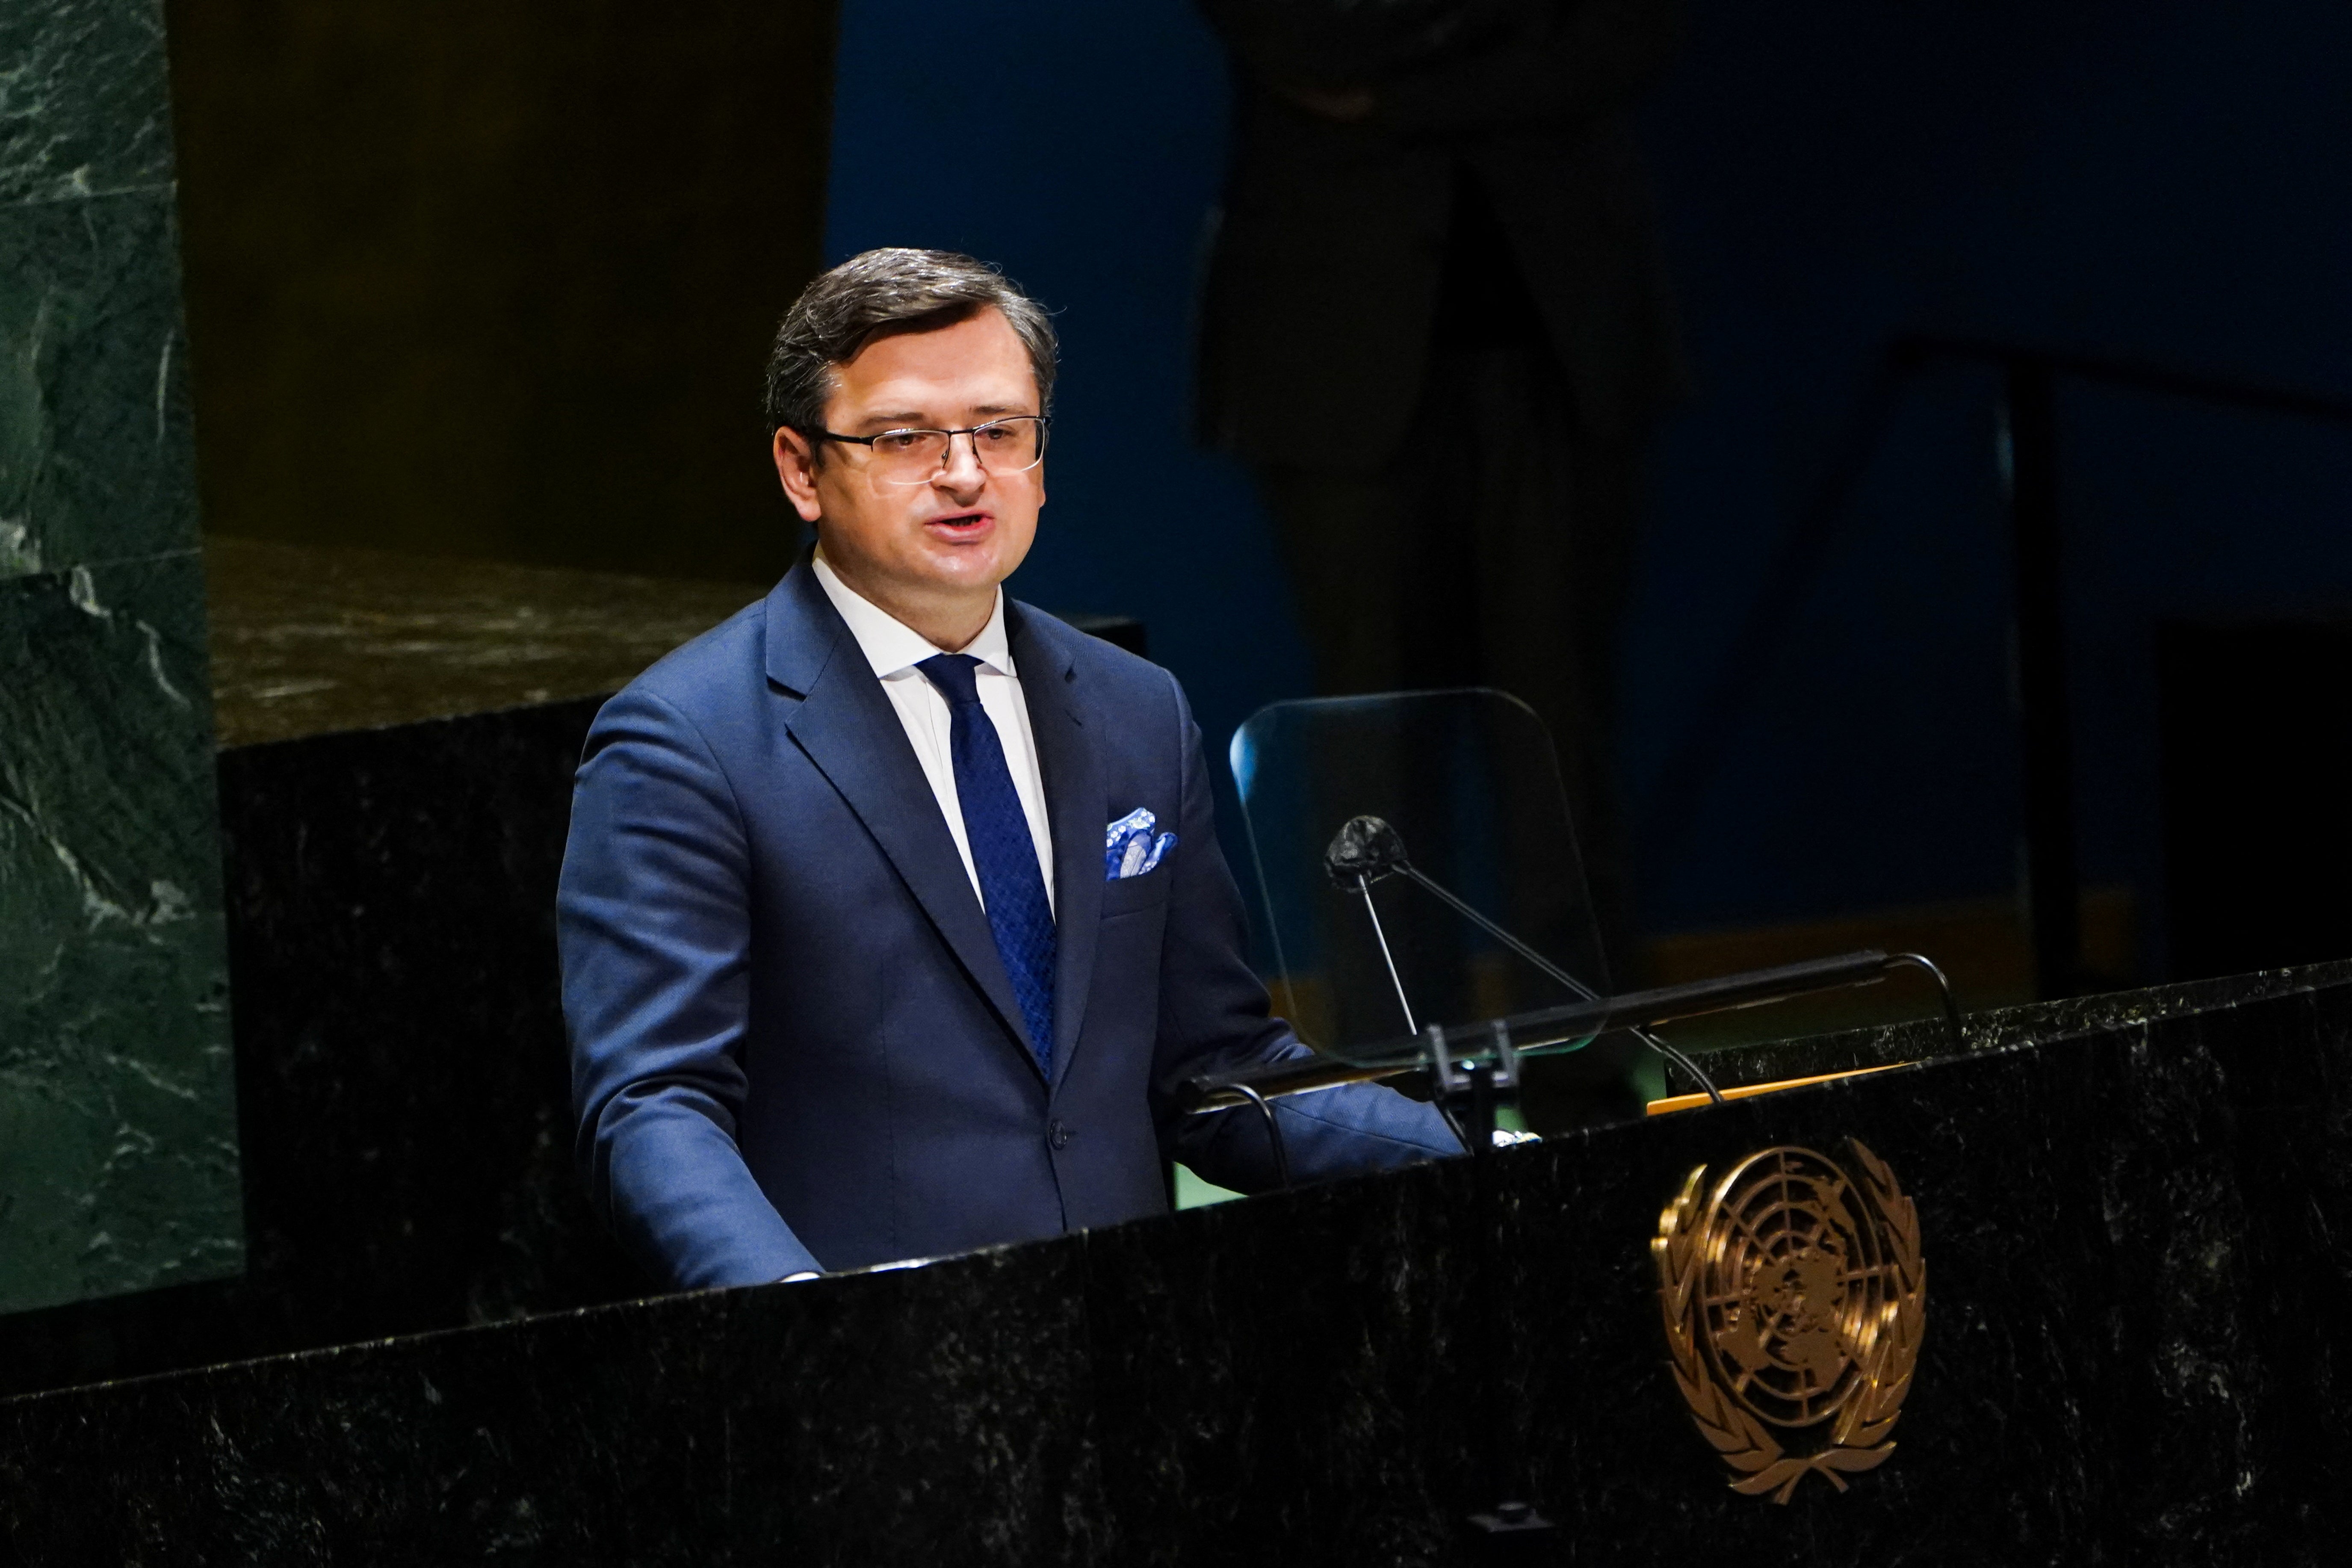 Ukraine’s Foreign Minister Dmytro Kuleba speaks during a meeting of the UN General Assembly in February